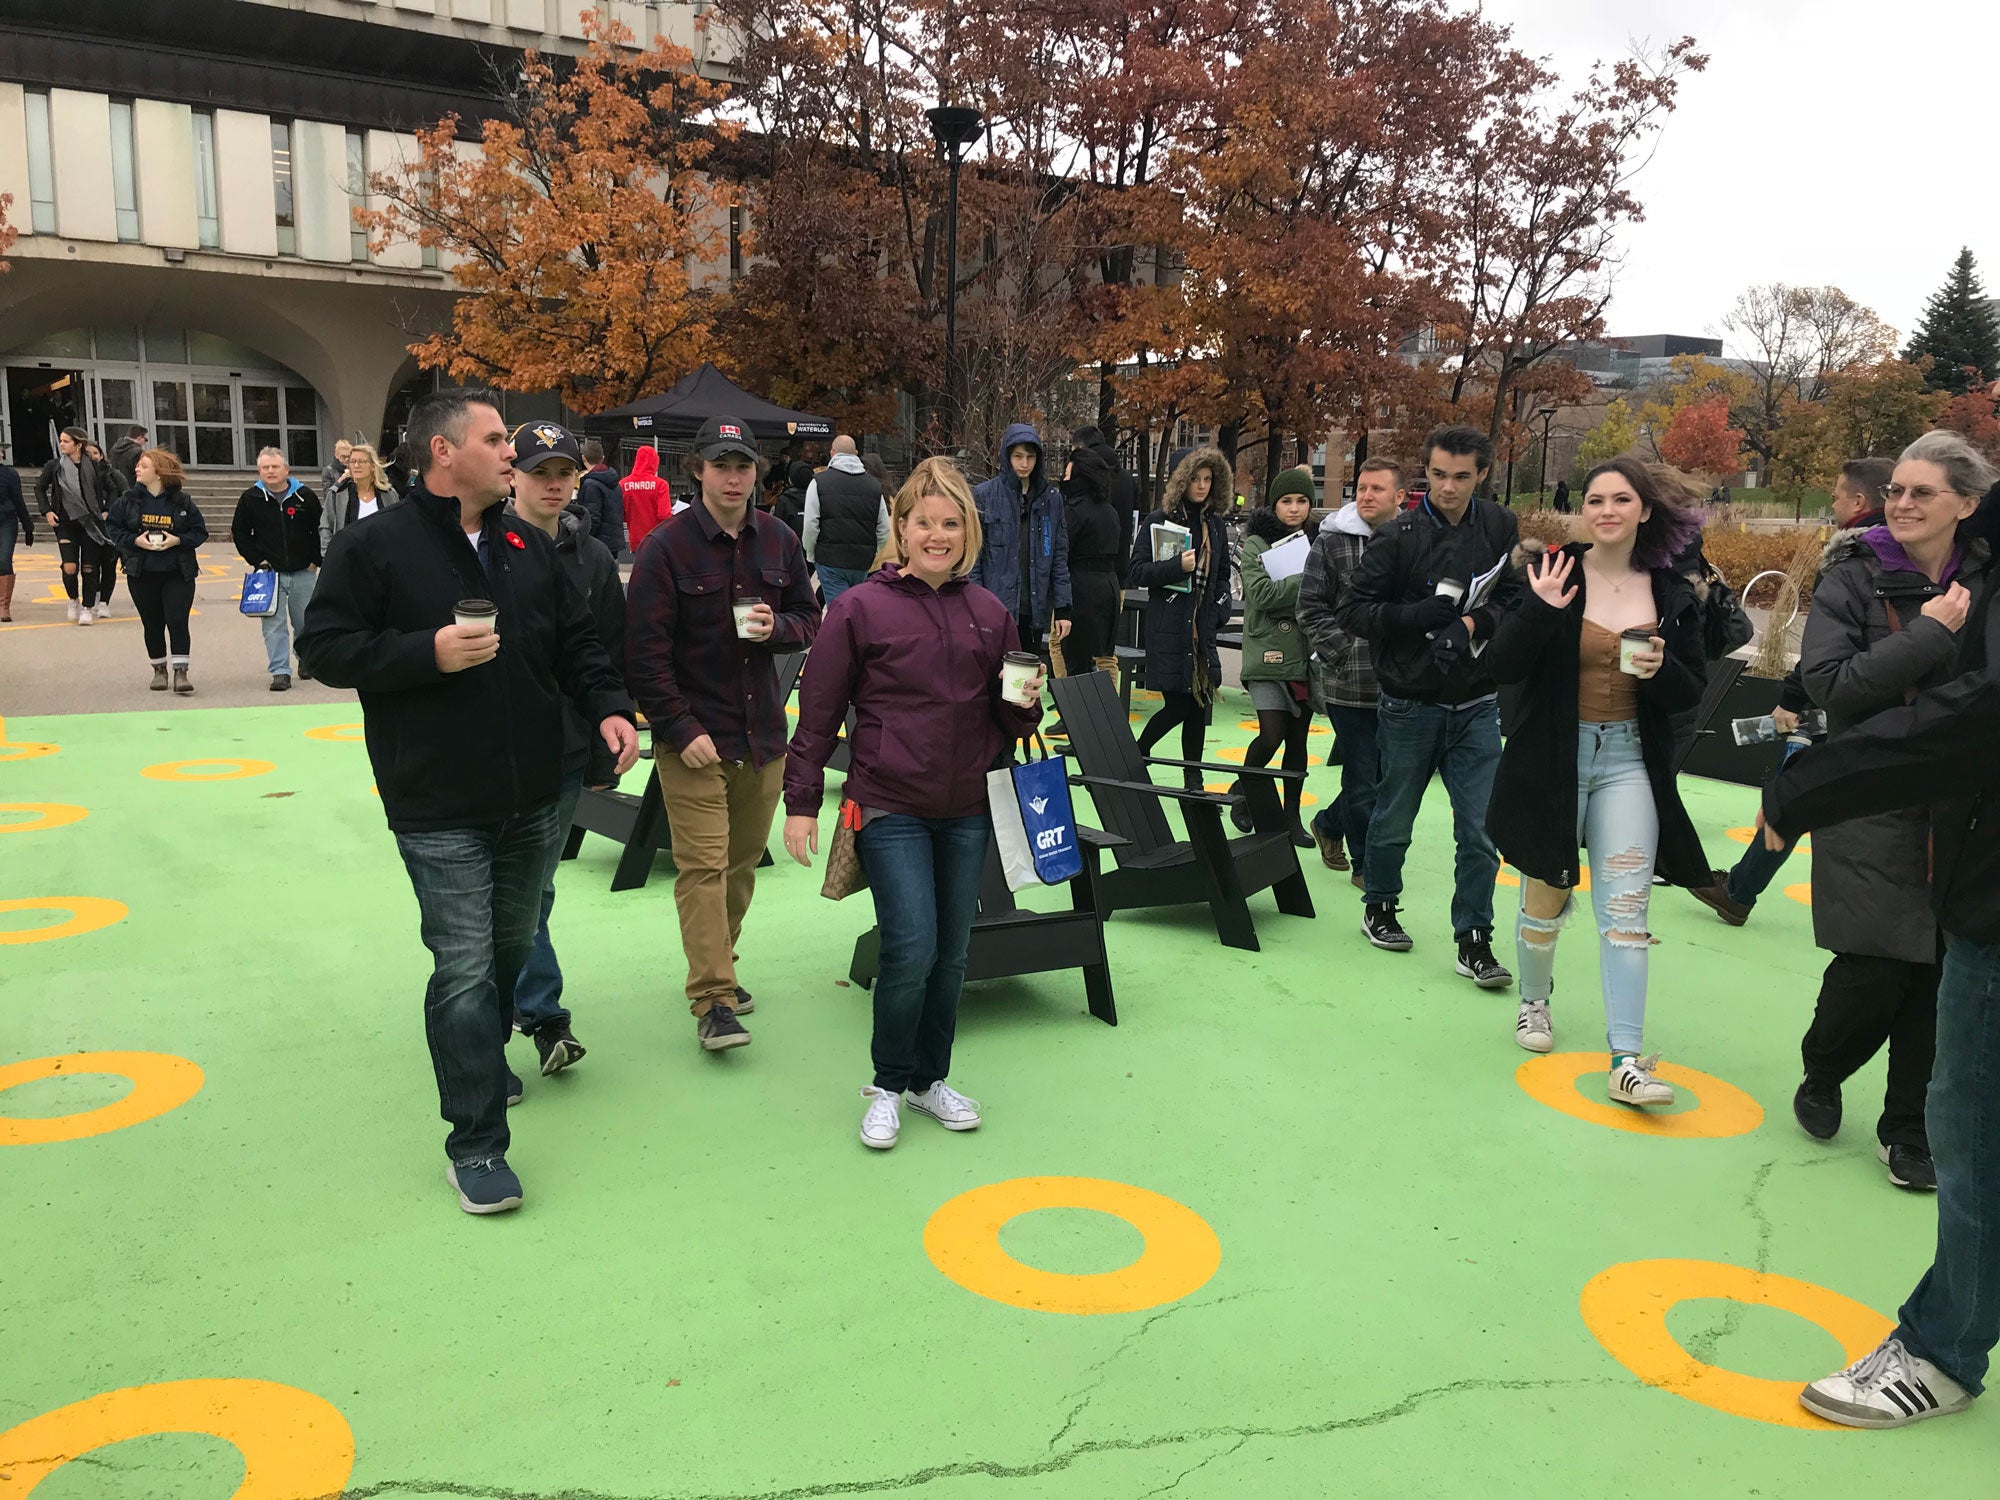 Students and parents walking through the space